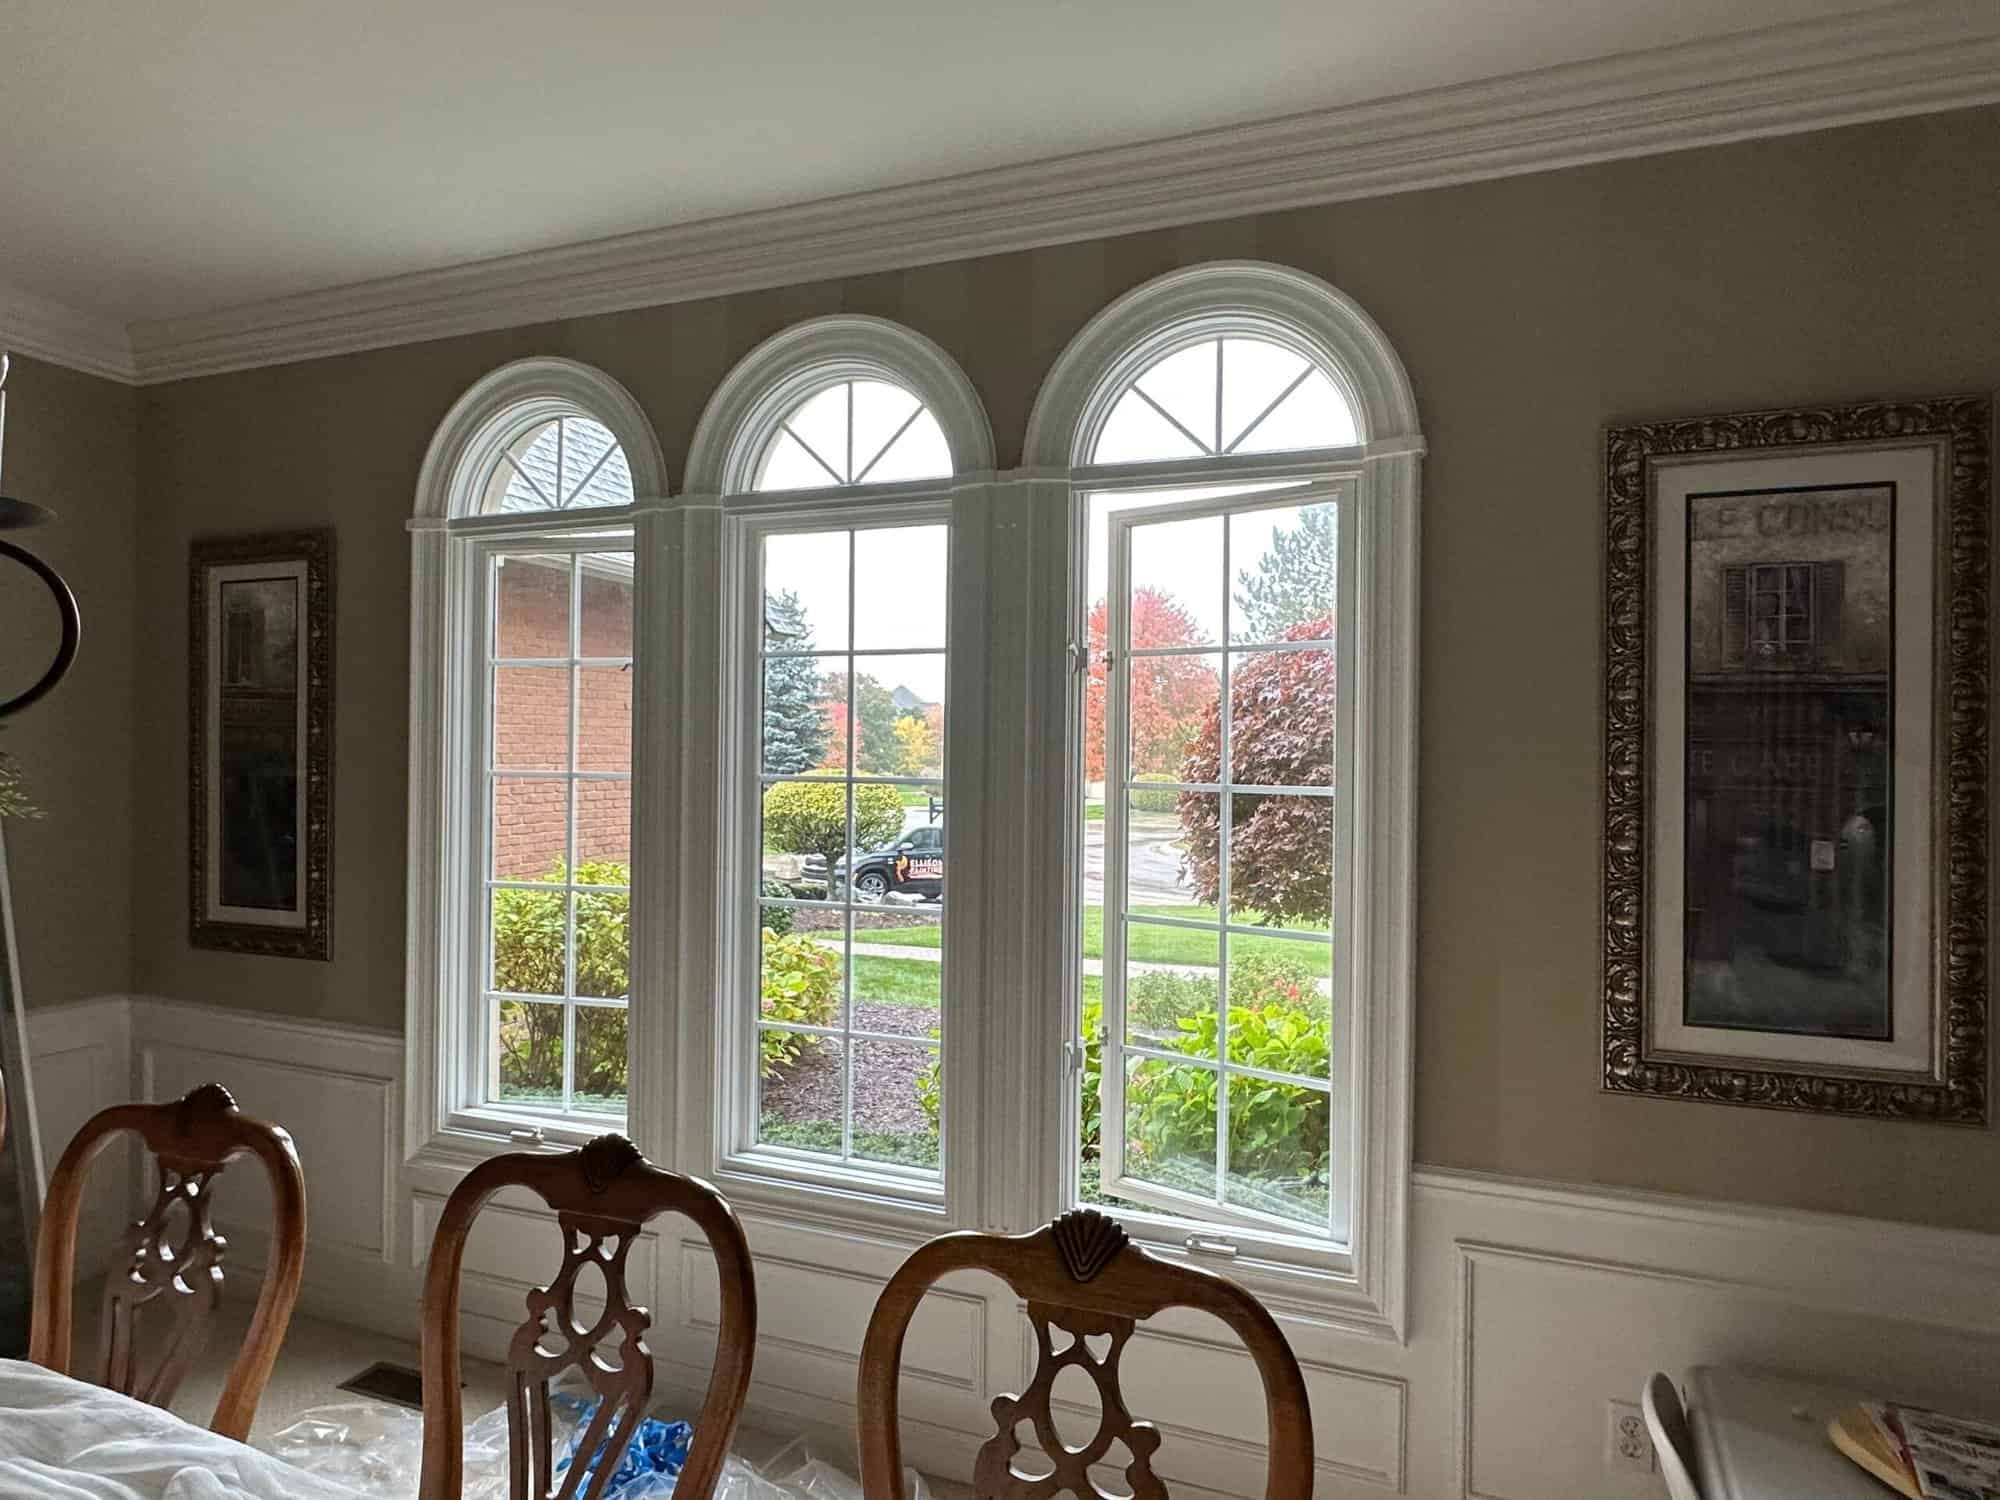 Three large windows in the dining room with white trims.